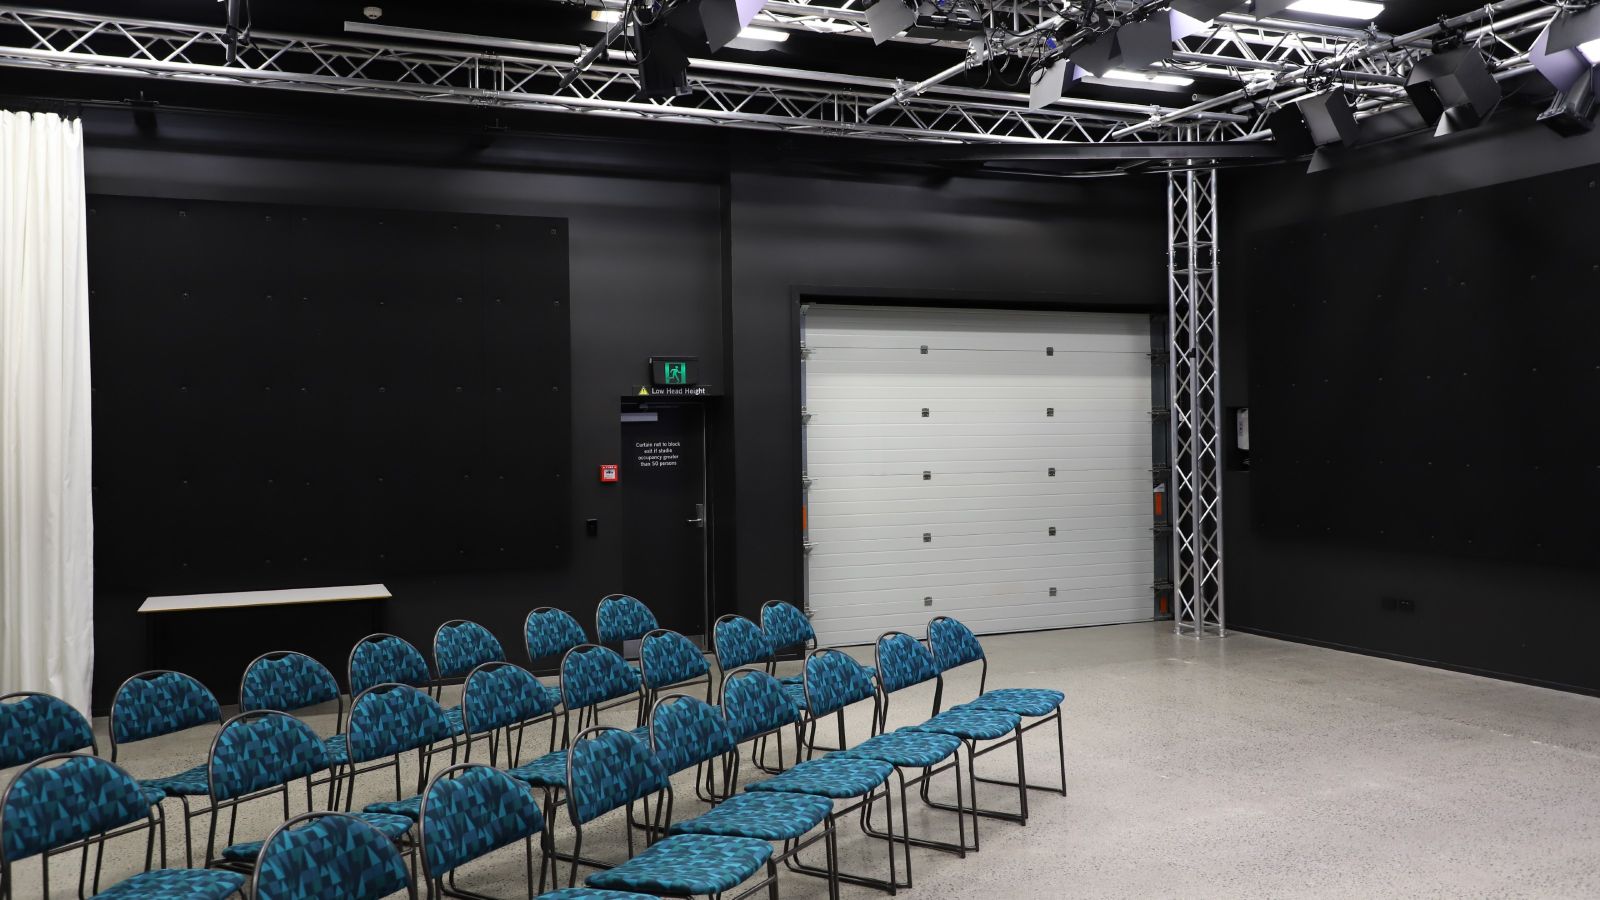 Film studio with TV screen and blue chairs in rows